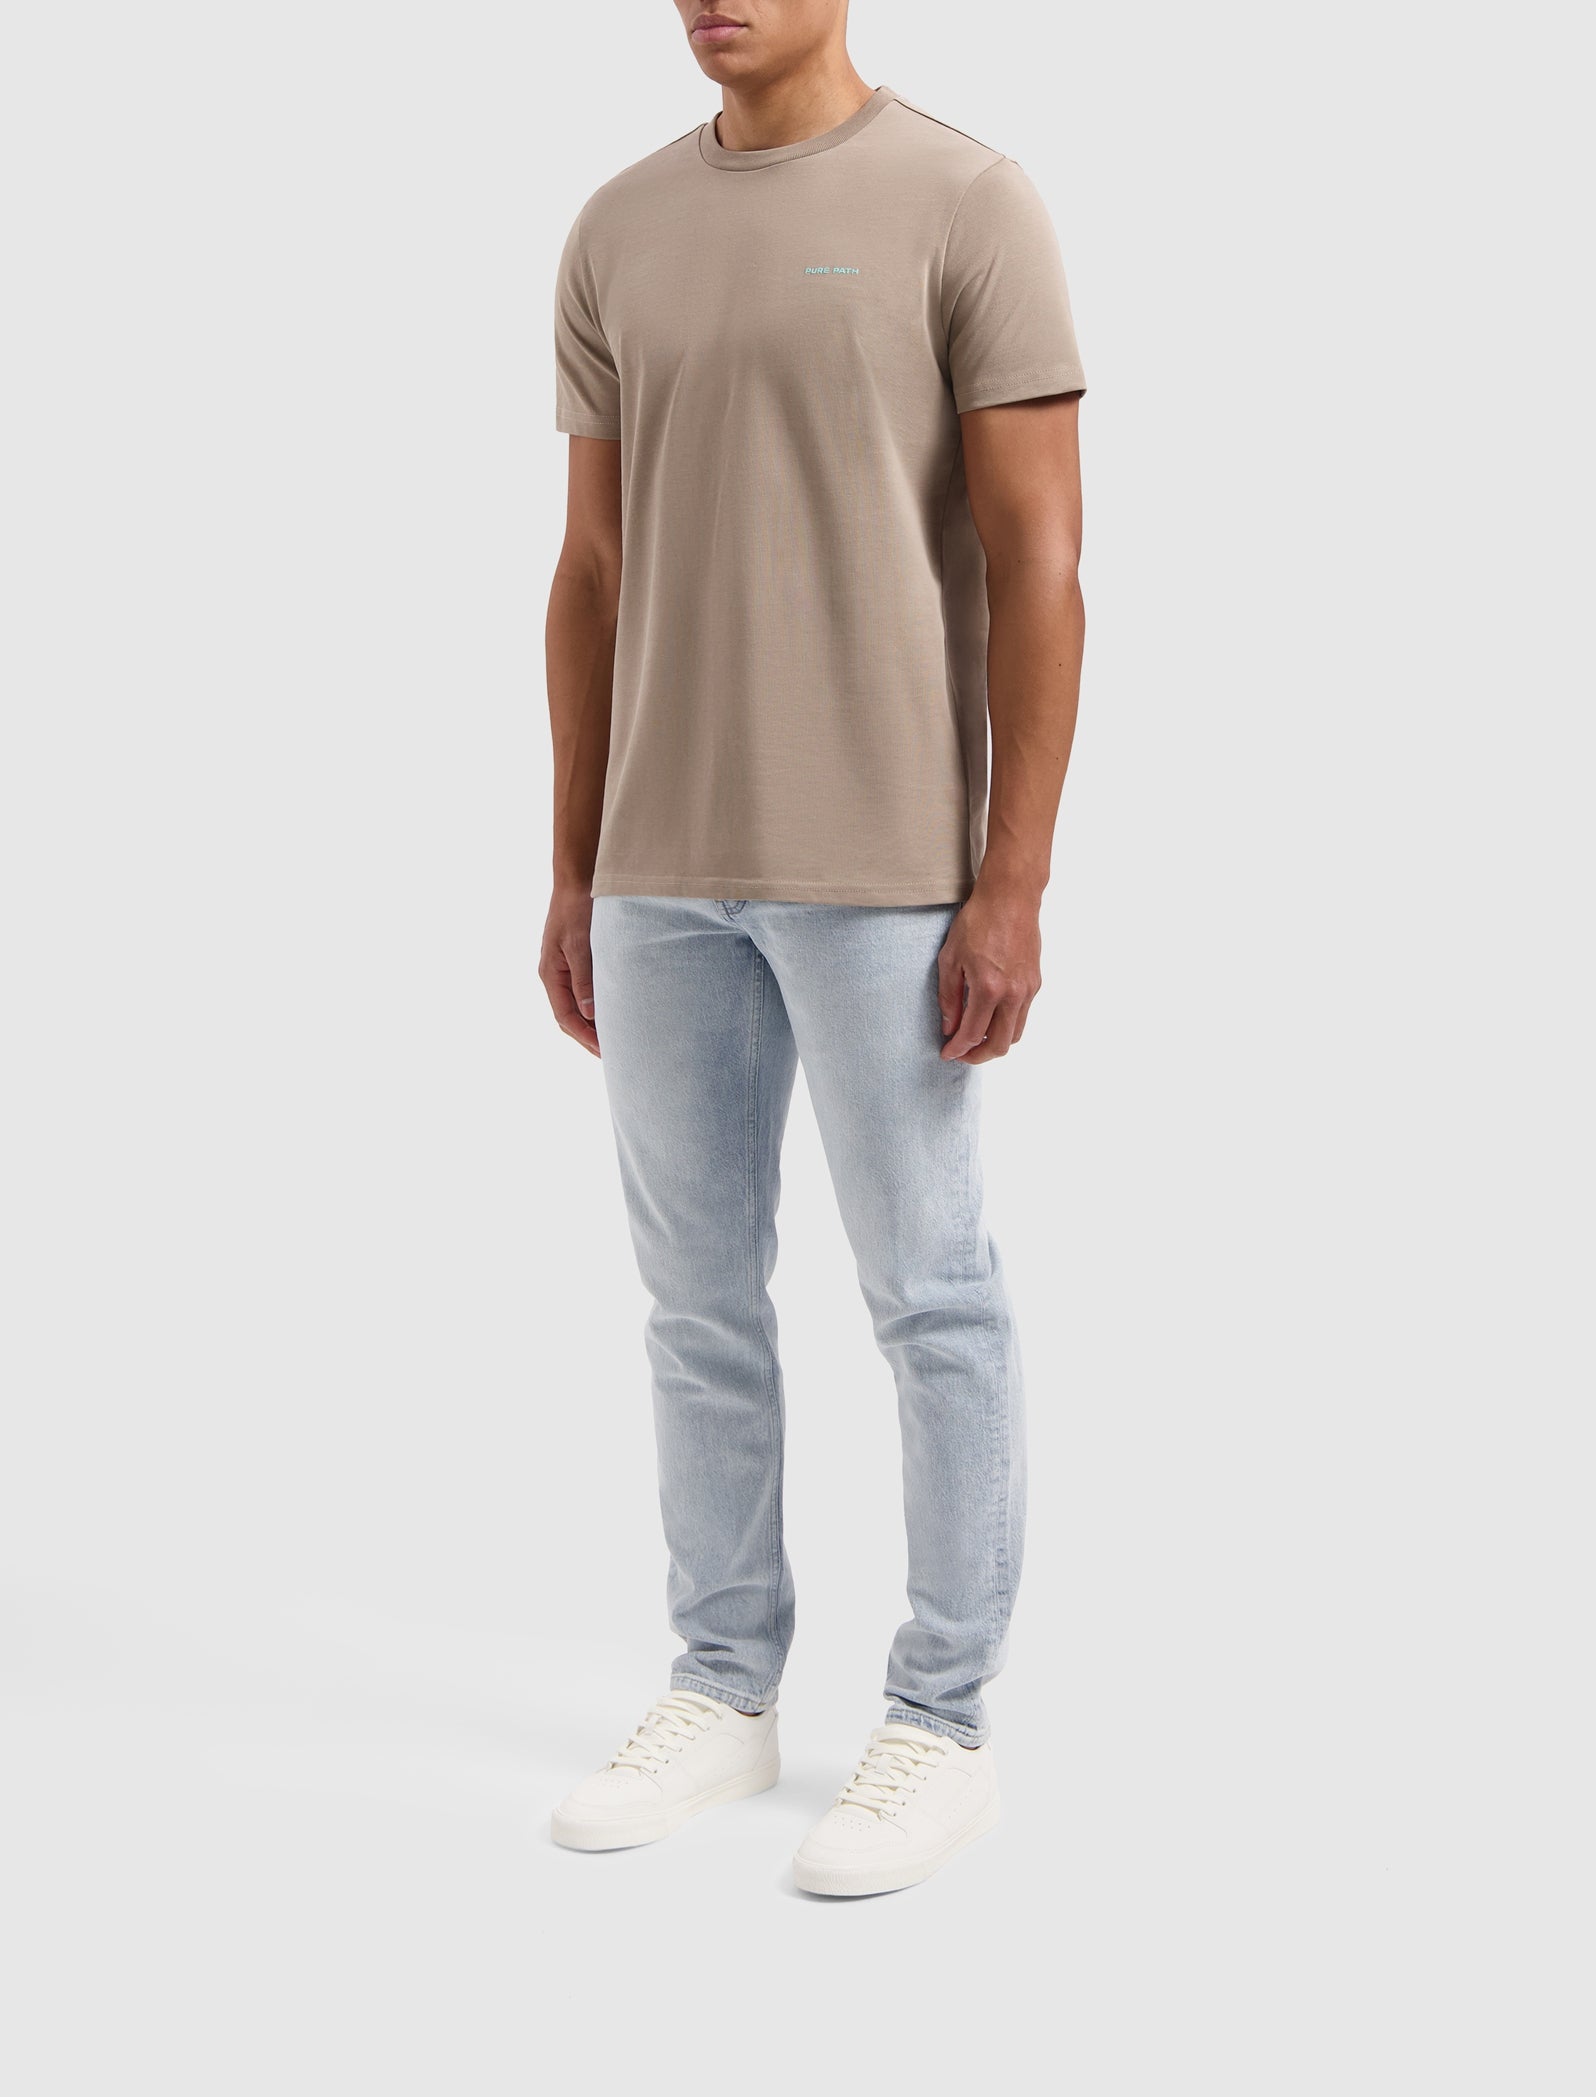 Own The Journey T-shirt | Taupe